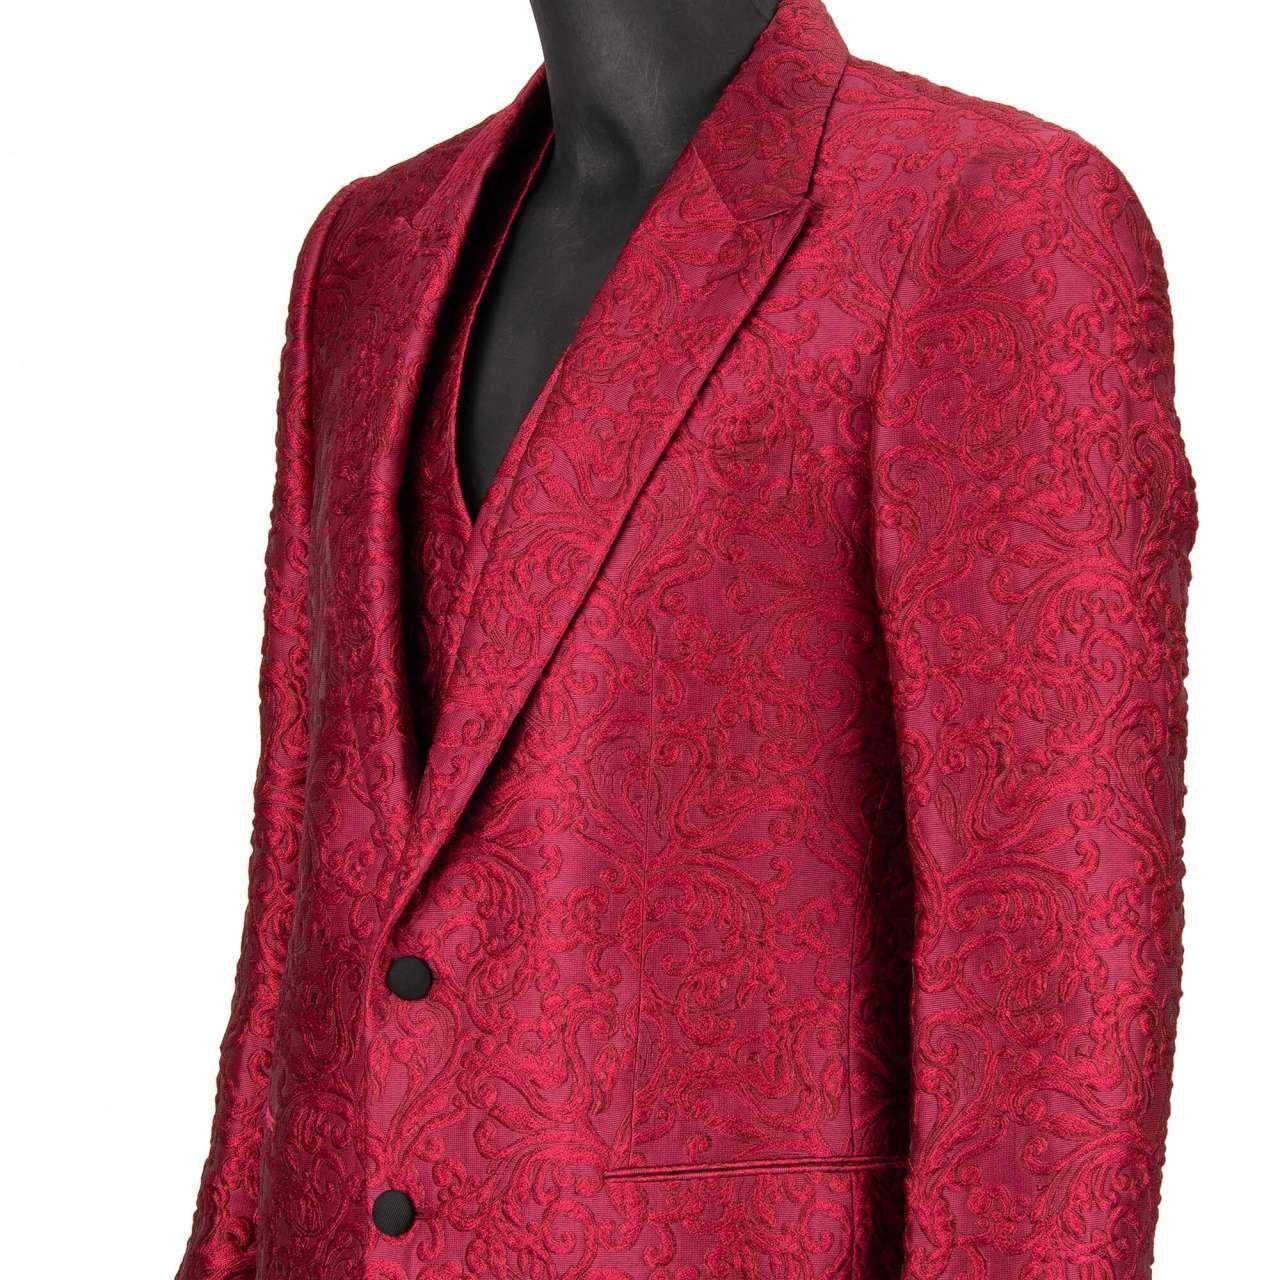 - Baroque jacquard 3 piece suit, jacket, waistcoat, pants with peak lapel in pink by DOLCE & GABBANA - SICILIA Model - RUNWAY - Dolce & Gabbana Fashion Show - New with tag - Former RRP: EUR 3,450 - MADE in ITALY - Slim Fit - Model: